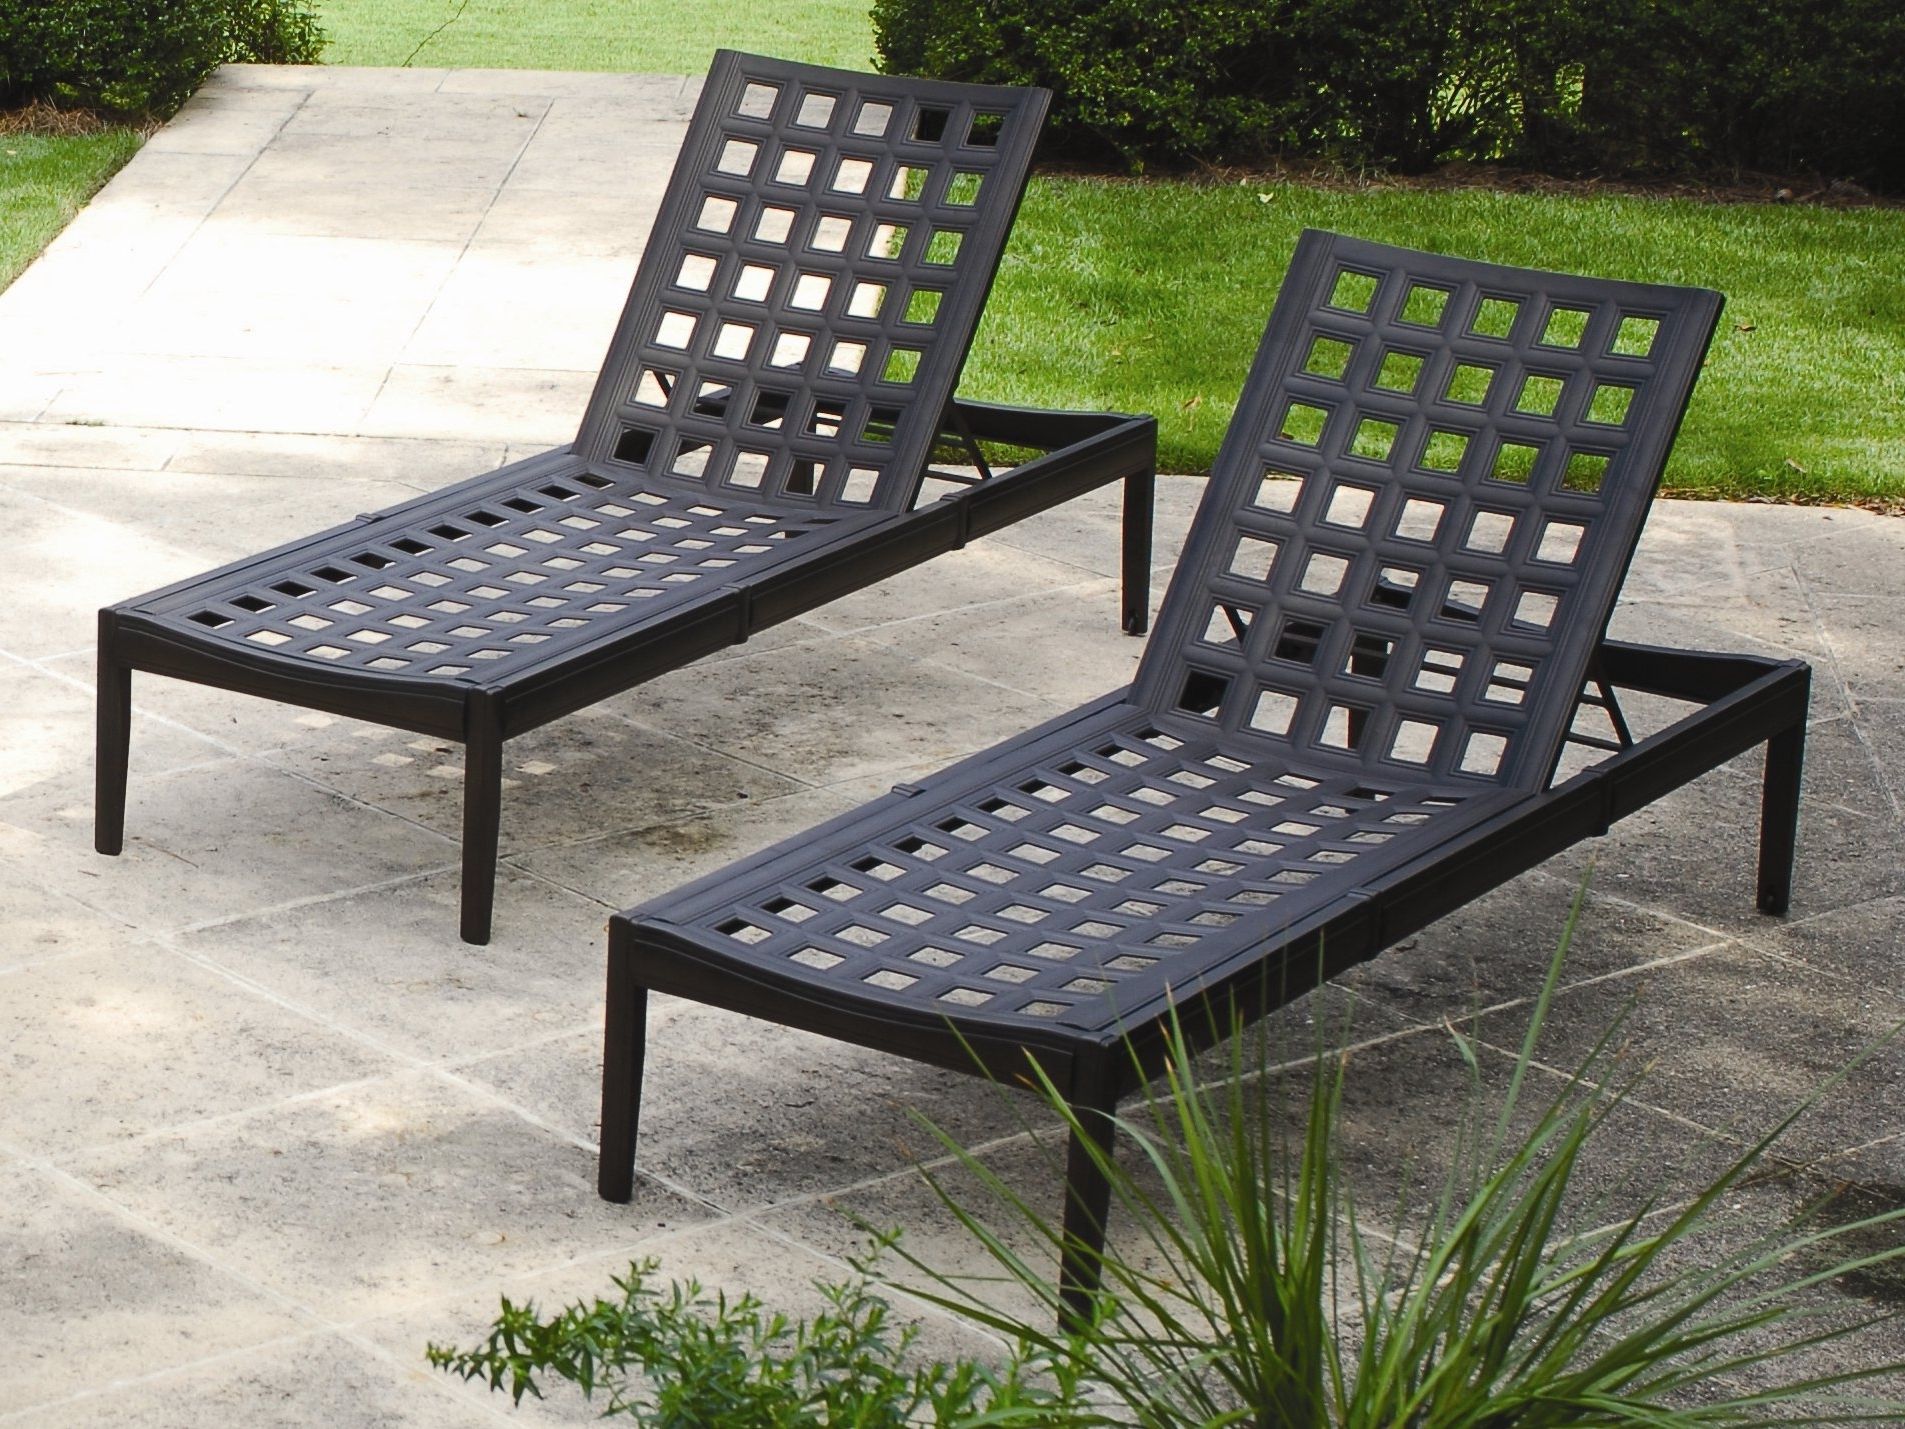 Outdoor Adjustable Chaise Lounge Chairs • Lounge Chairs Ideas Inside Fashionable Chaise Lounge Chairs For Outdoor (View 1 of 15)